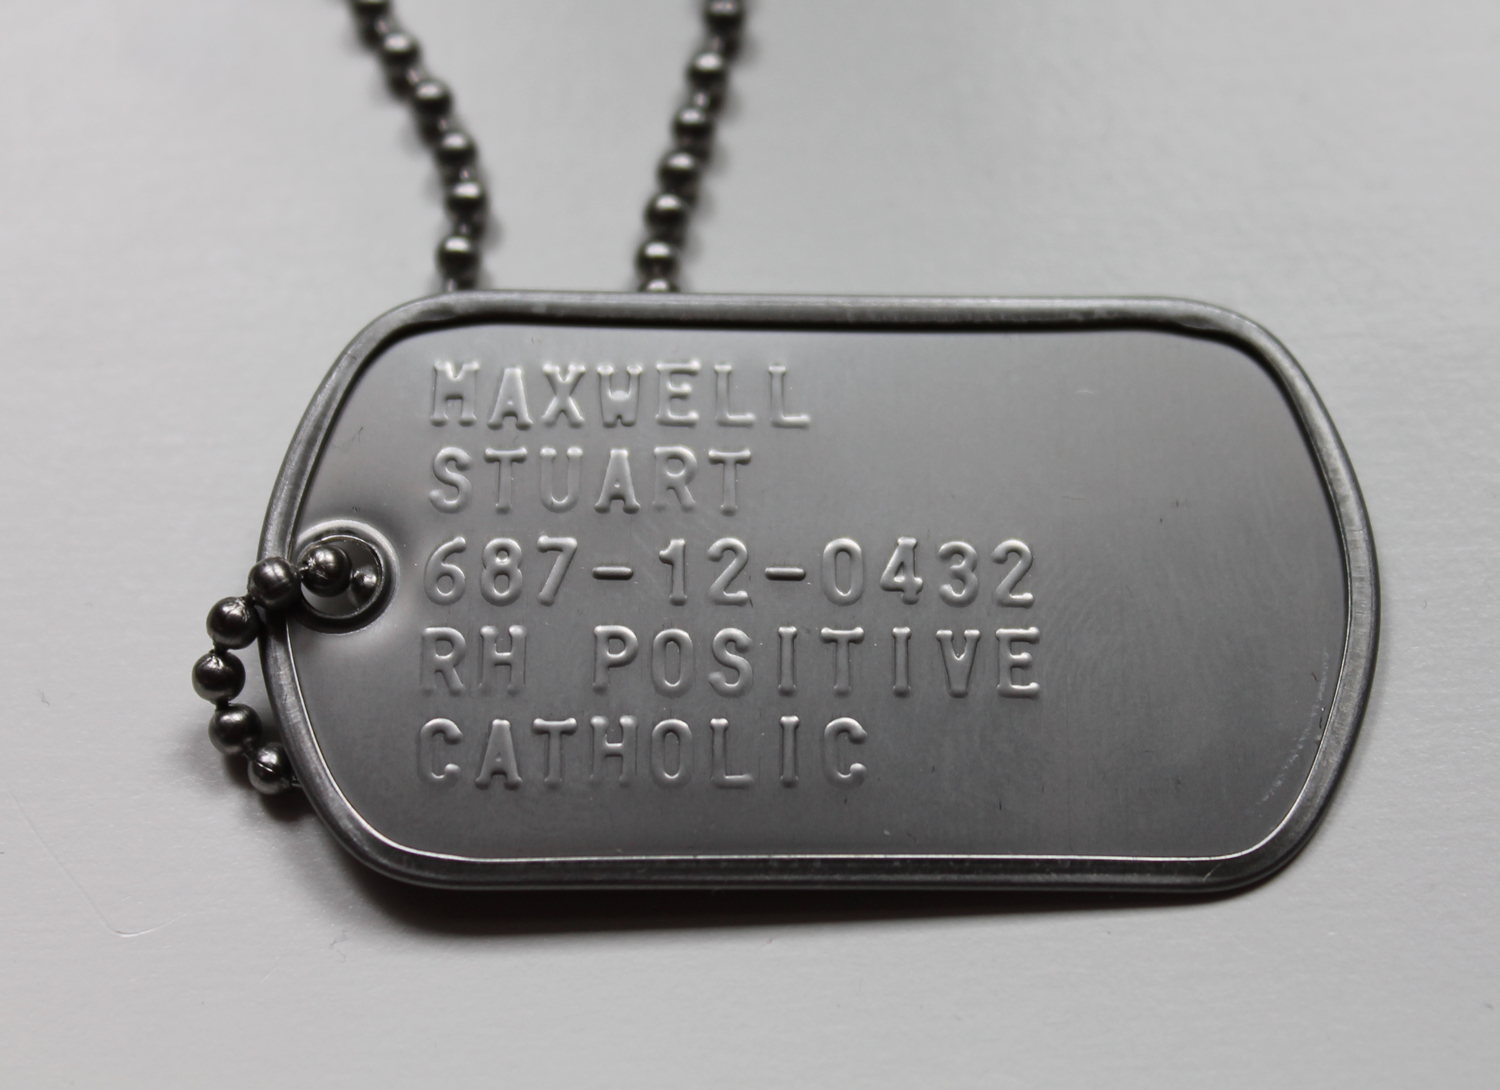 u-s-army-changing-dog-tags-for-first-time-in-40-years